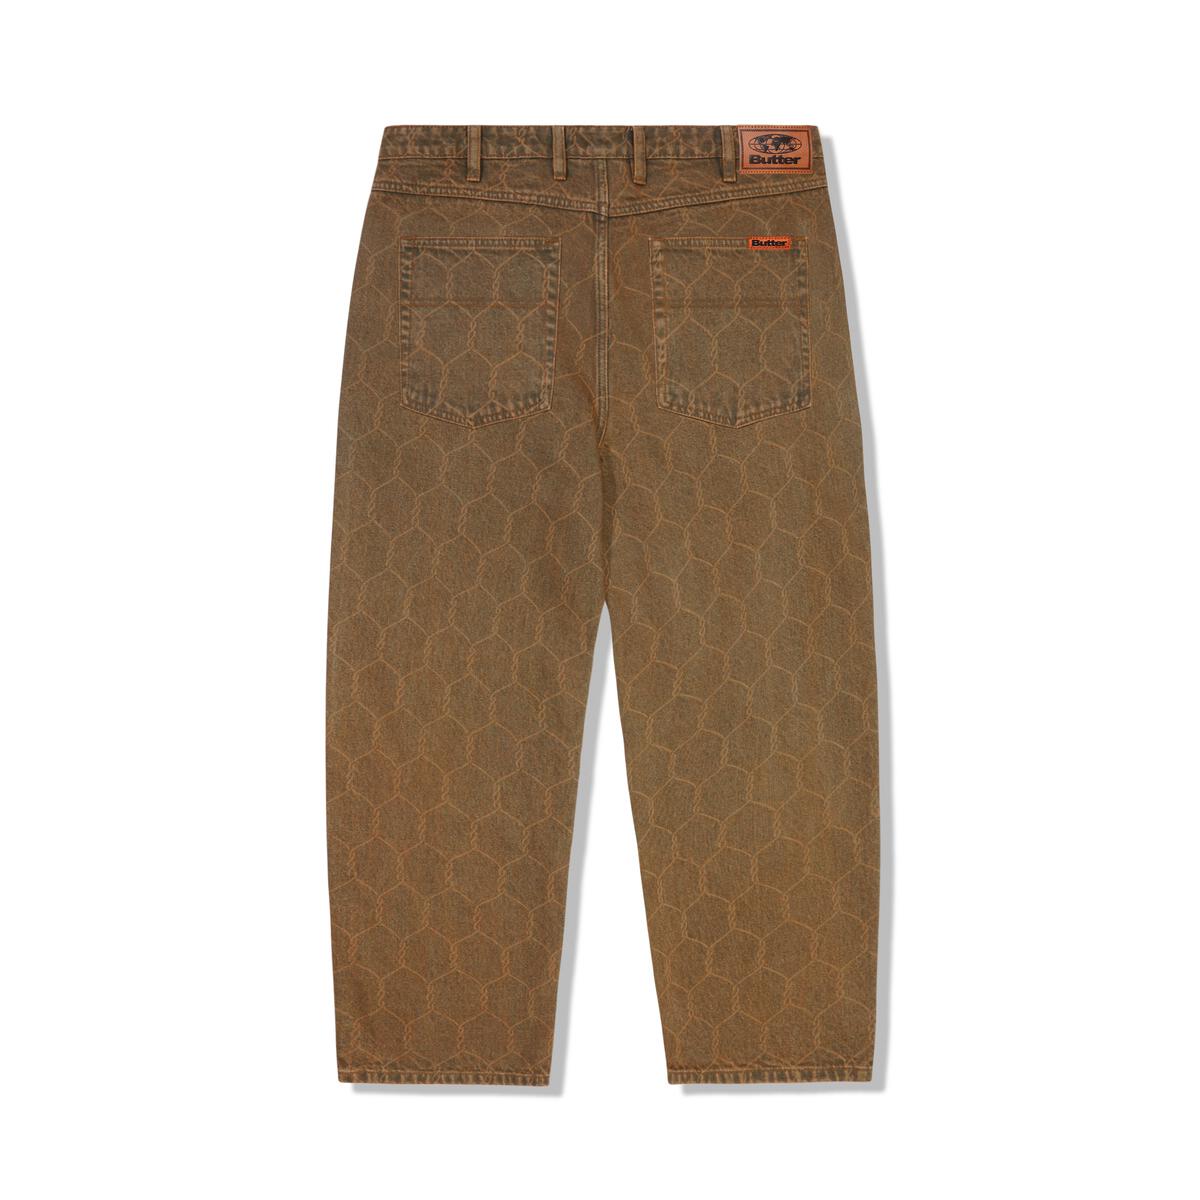 BUTTERGOODS CHAIN LINK DENIM JEANS WASHED BROWN